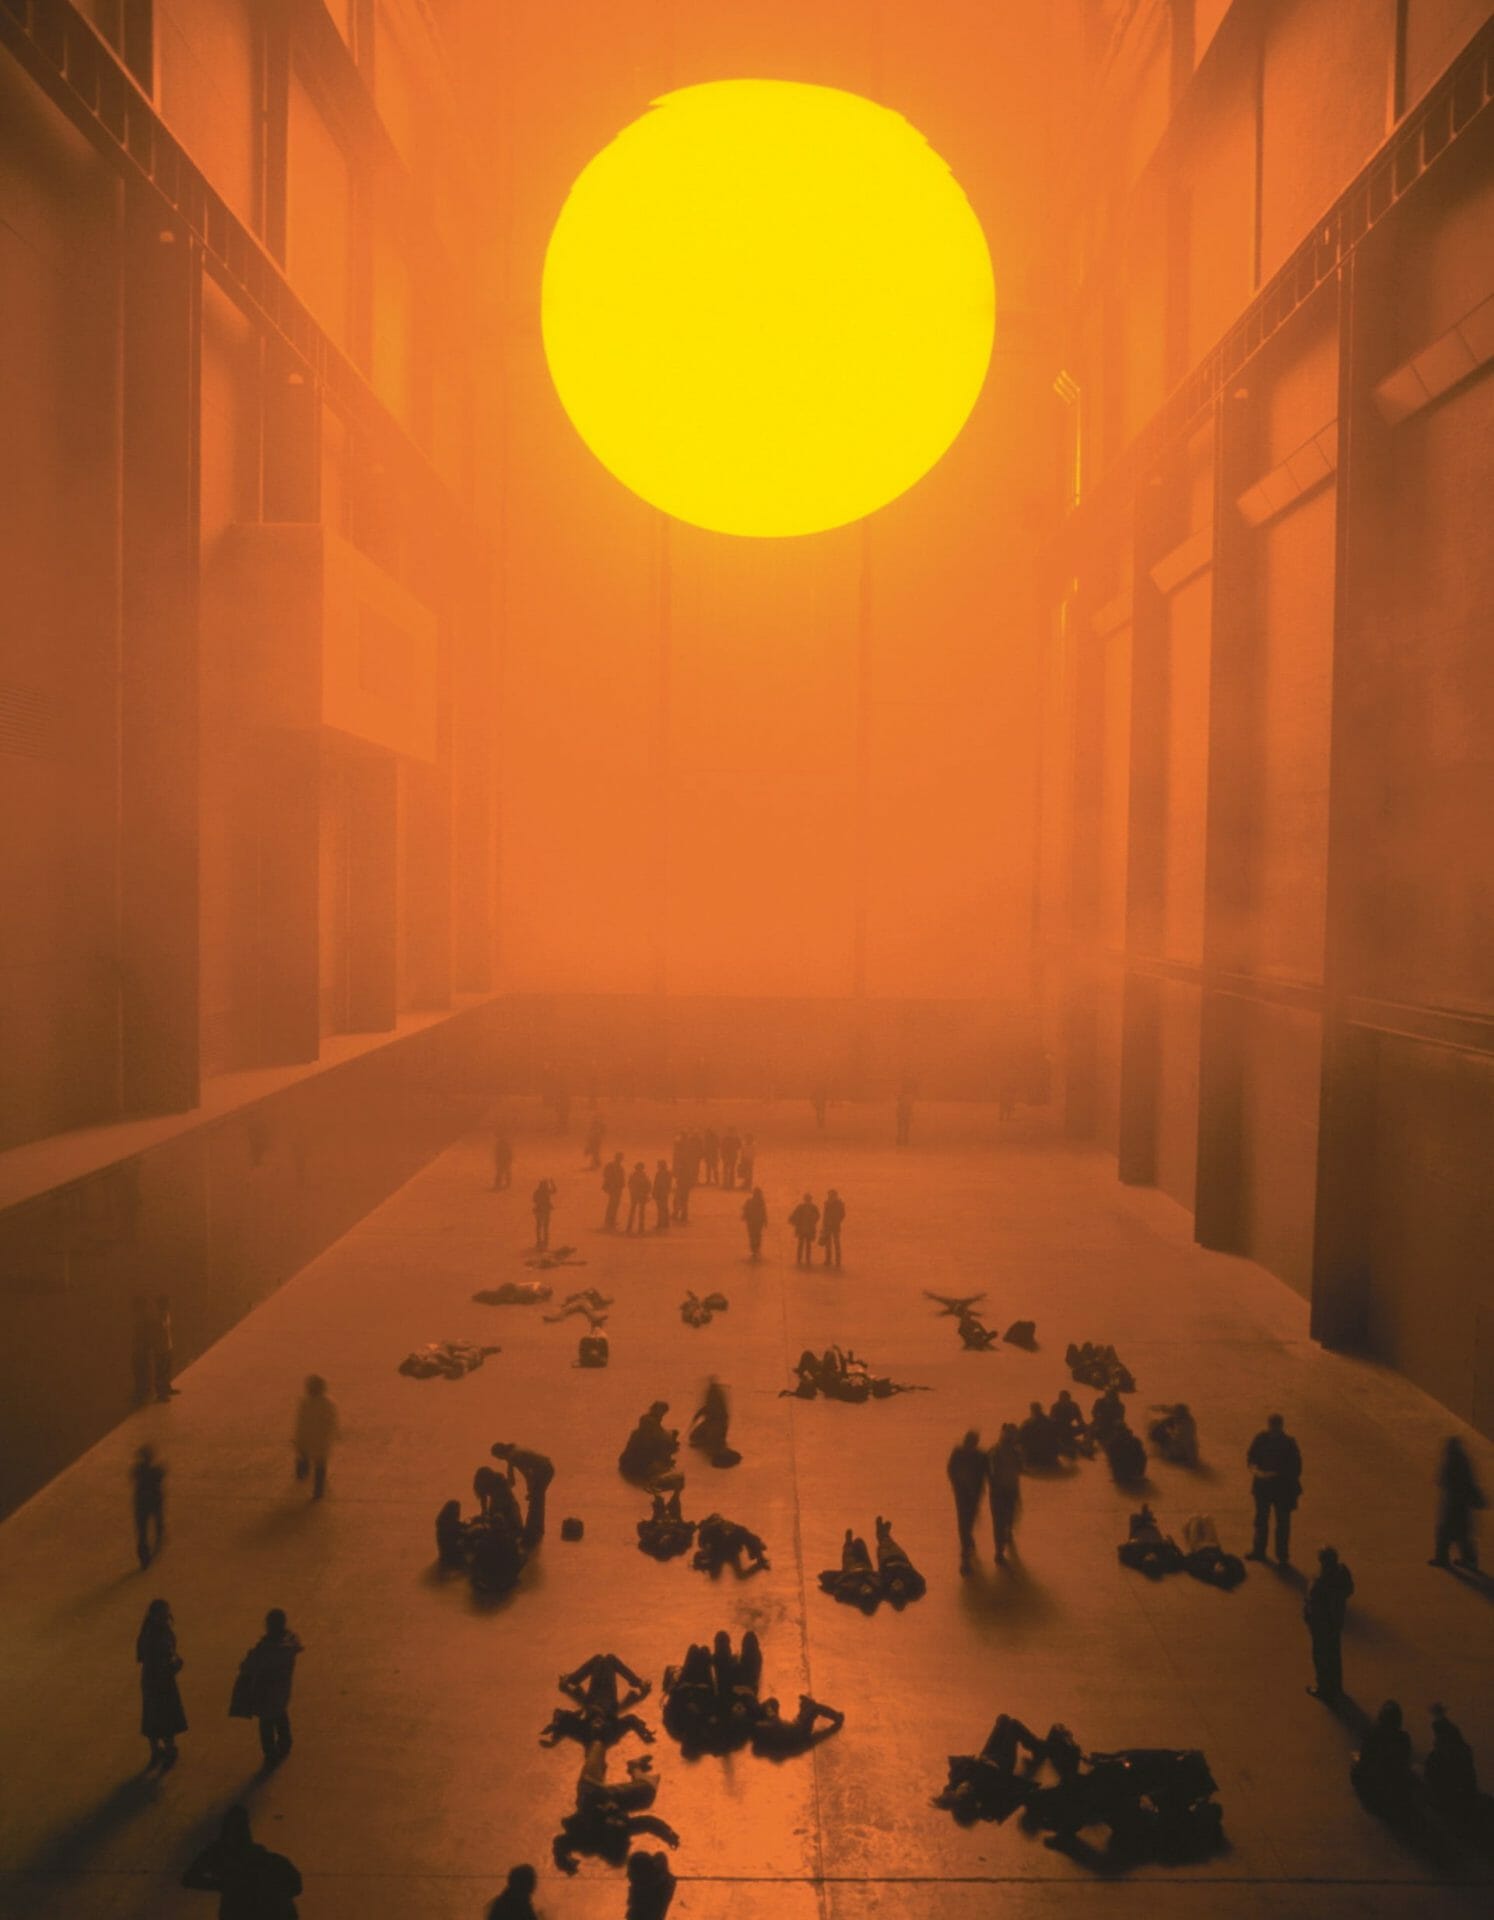 “The weather project” (2003), monofrequency lamps, projection screen, haze machines, foil mirror, aluminum, scaffolding, 26.7 x 22.3 x 155.44 meters, installation view at Tate Modern, London. Photo by Tate photography, Andrew Dunkley & Marcus Leith